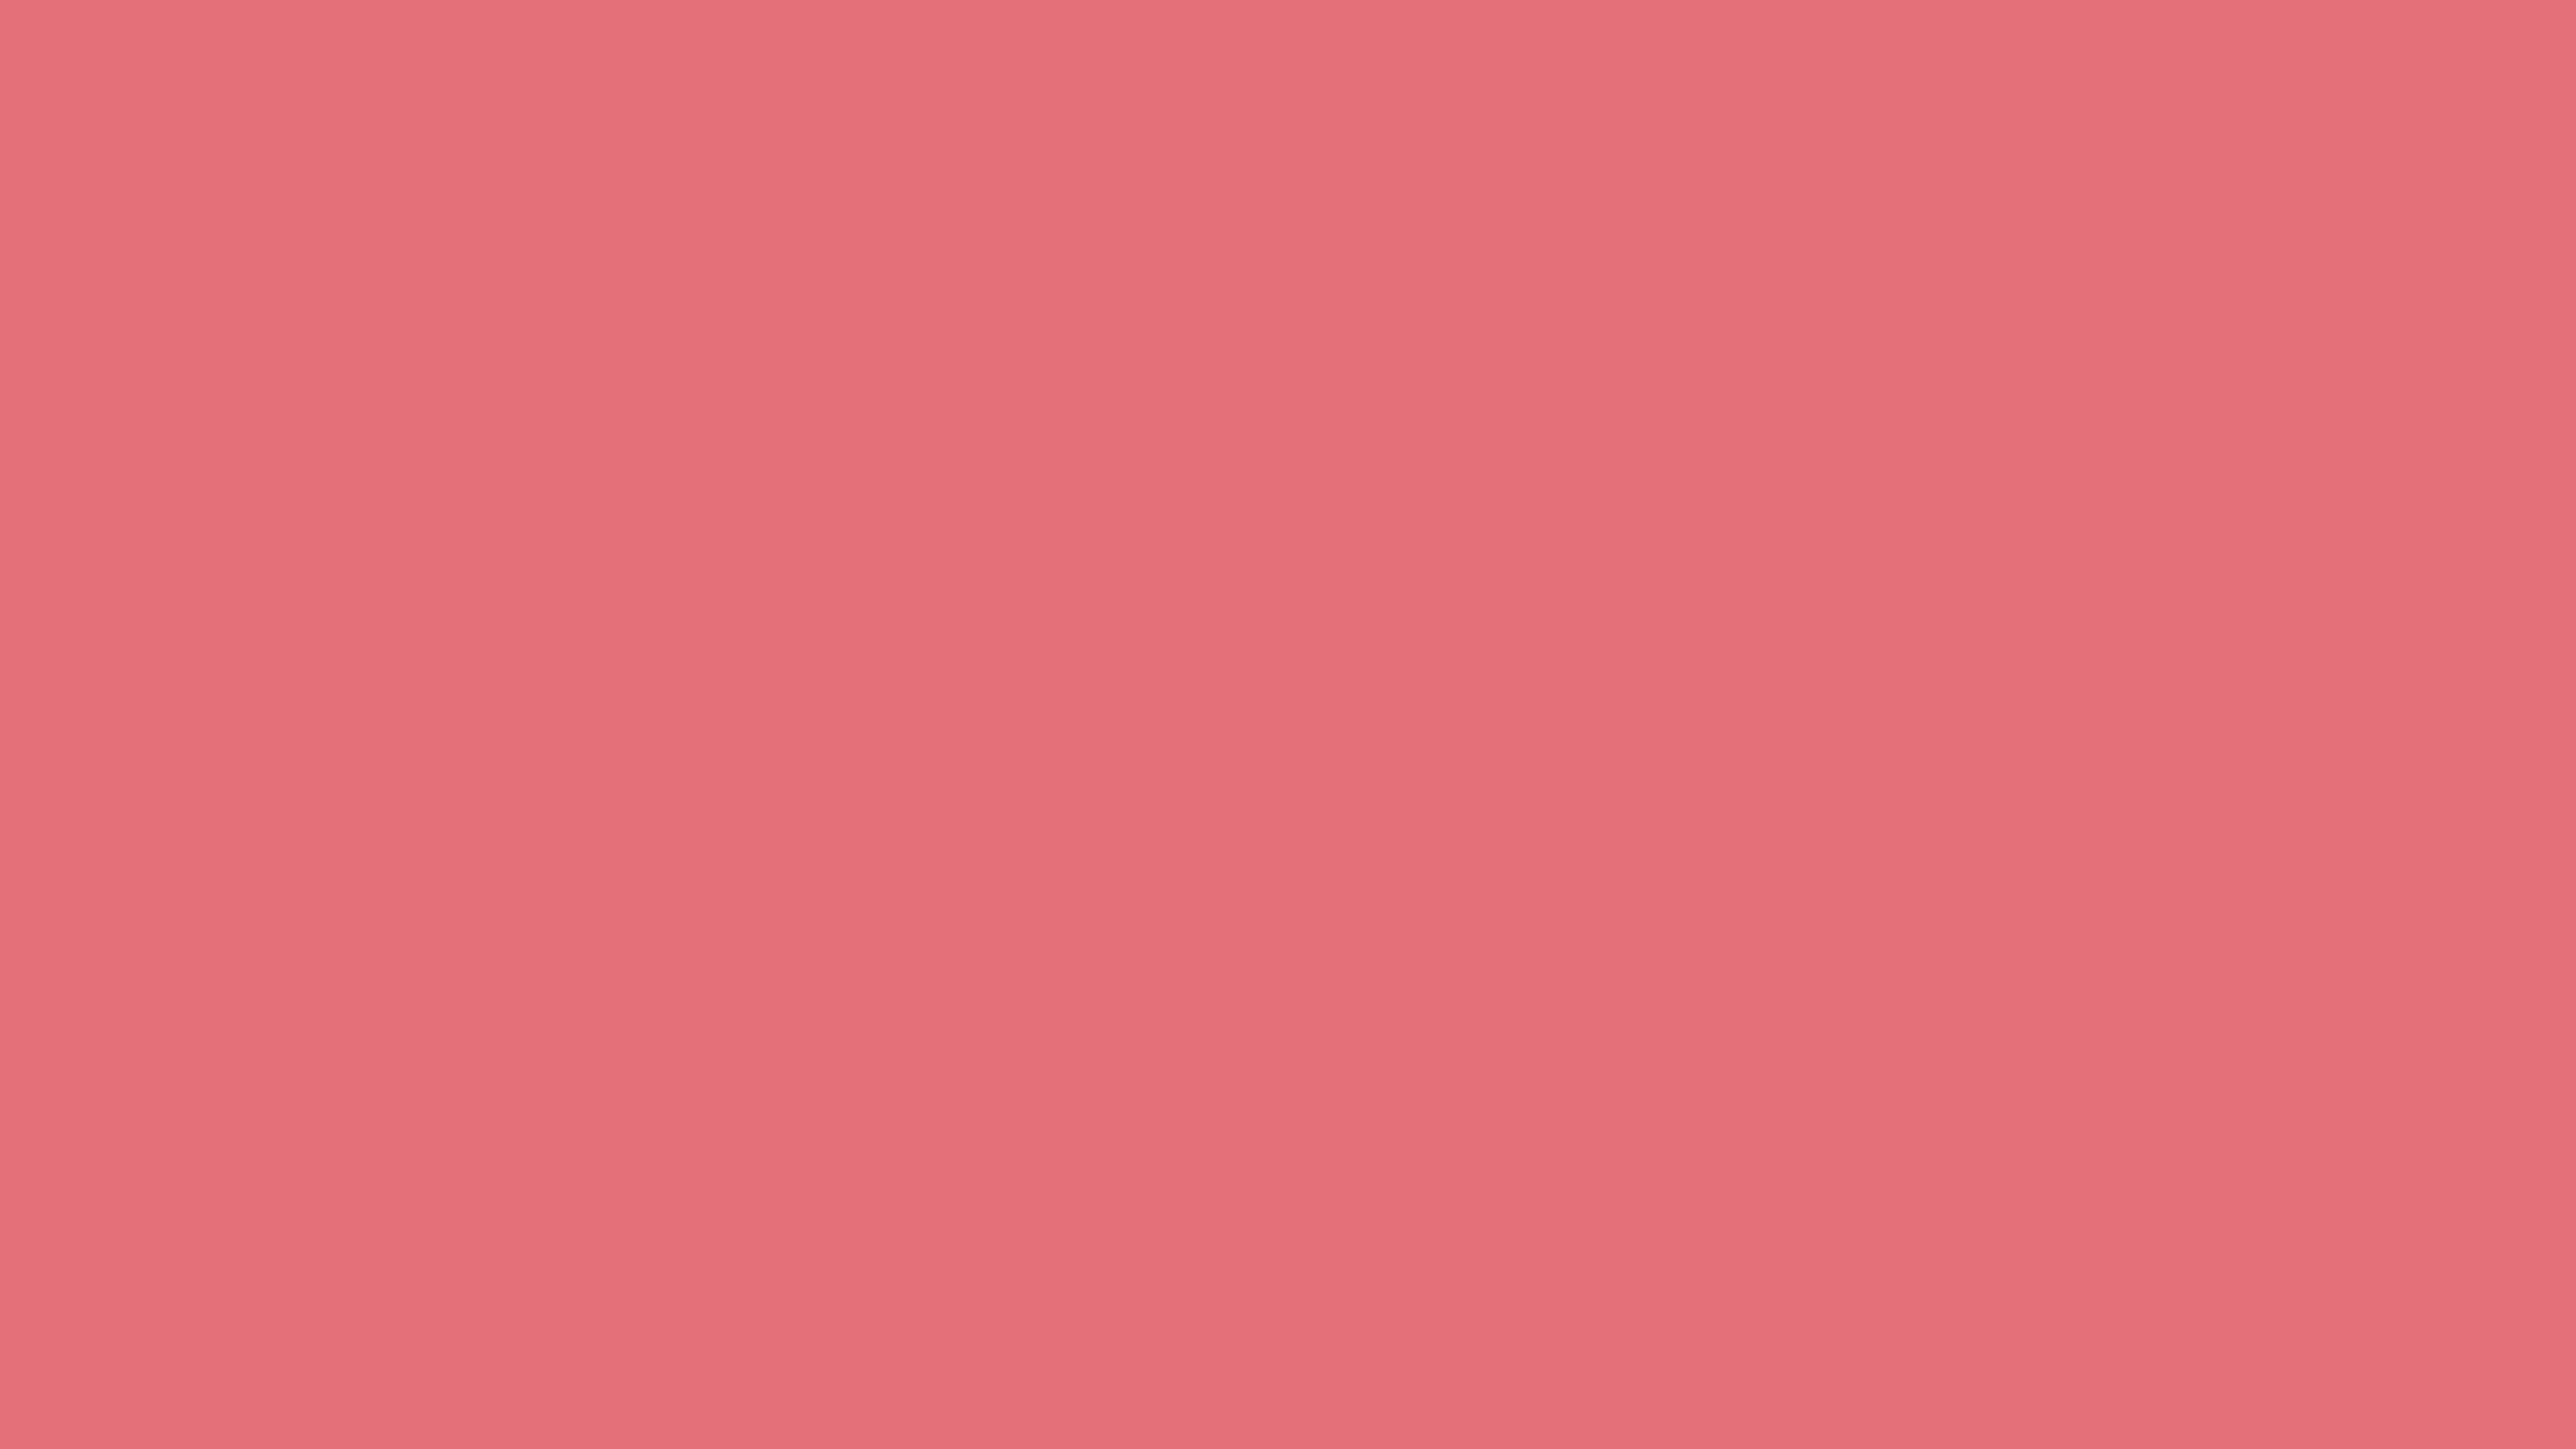 7680x4320 Candy Pink Solid Color Background